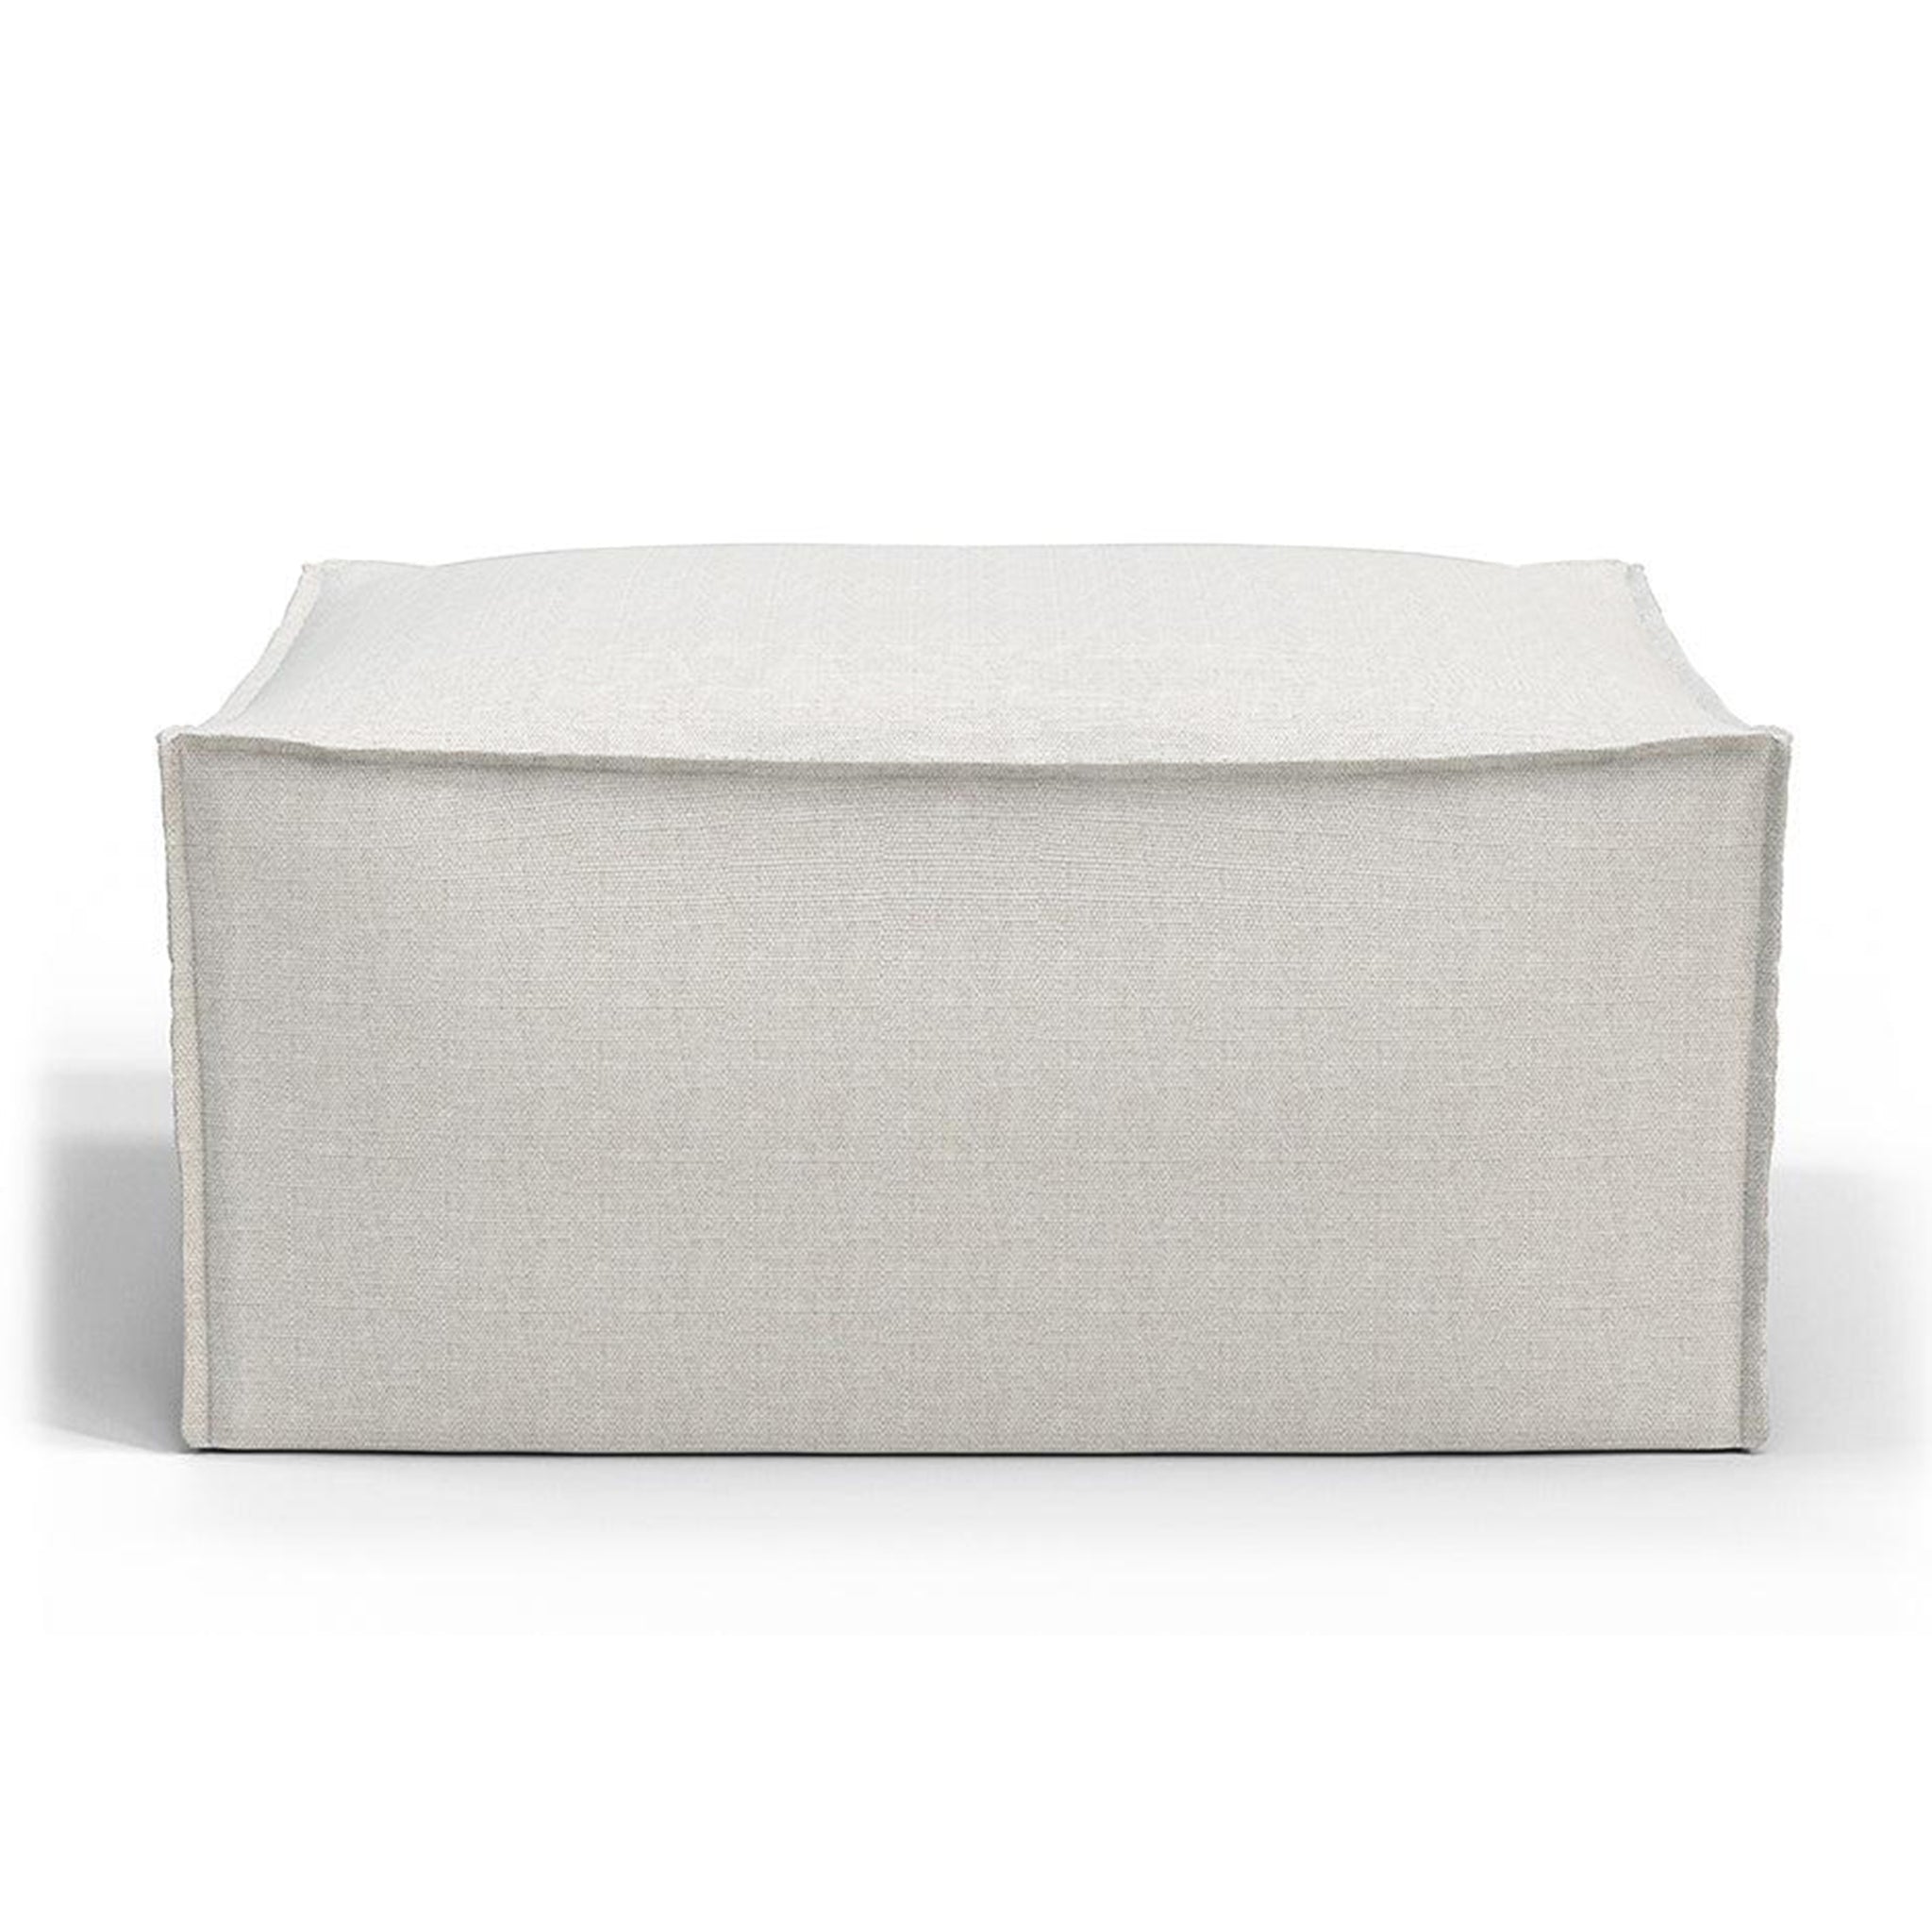 Gray ottoman with a clean and modern design, ideal for enhancing contemporary living spaces as a stylish and functional seating option or footrest.